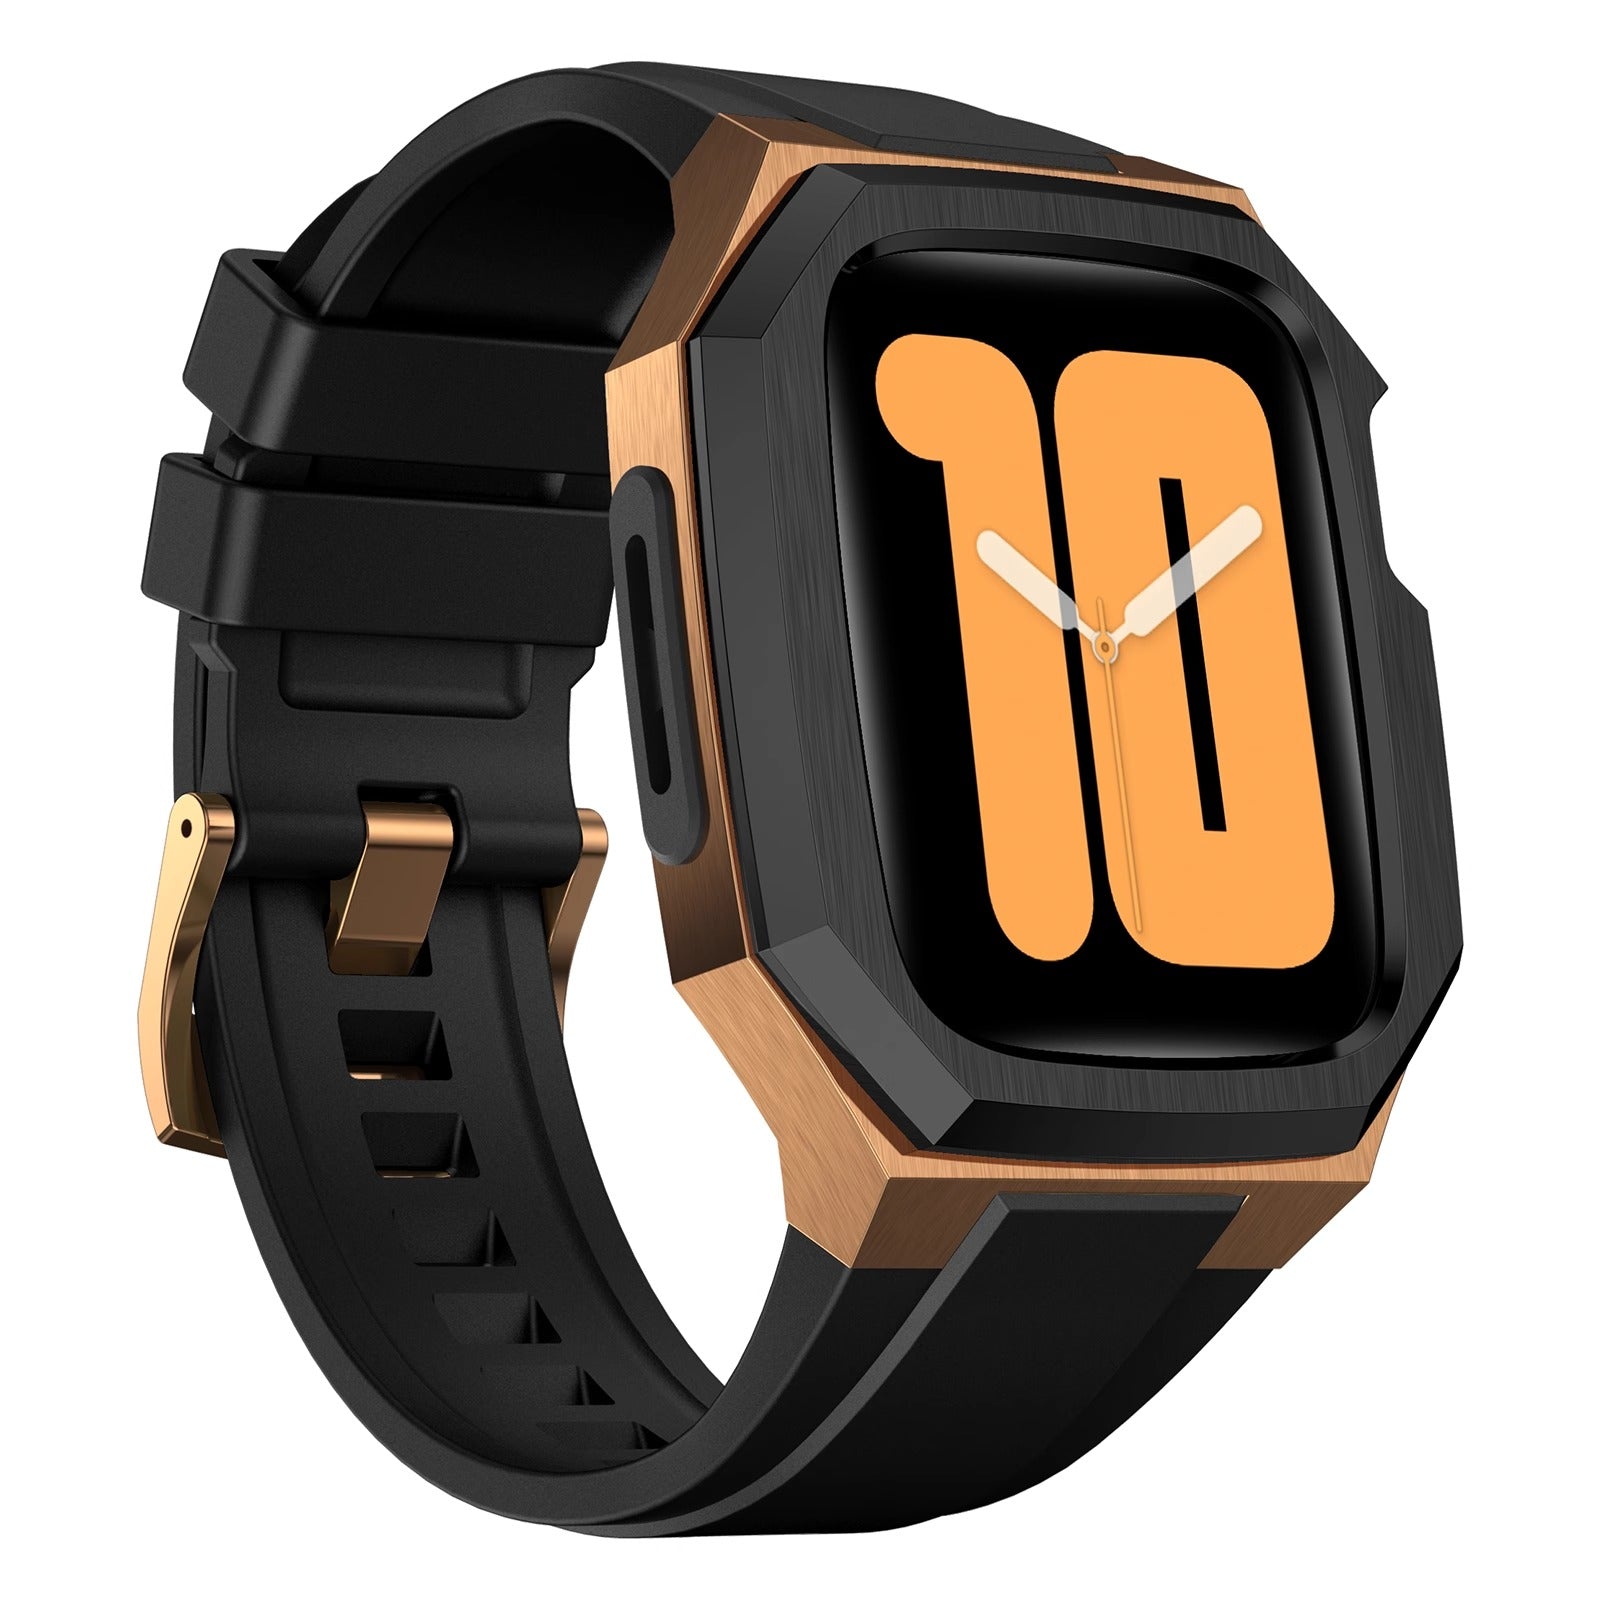 Stainless Steel Case With Rubber Band for Apple Watch